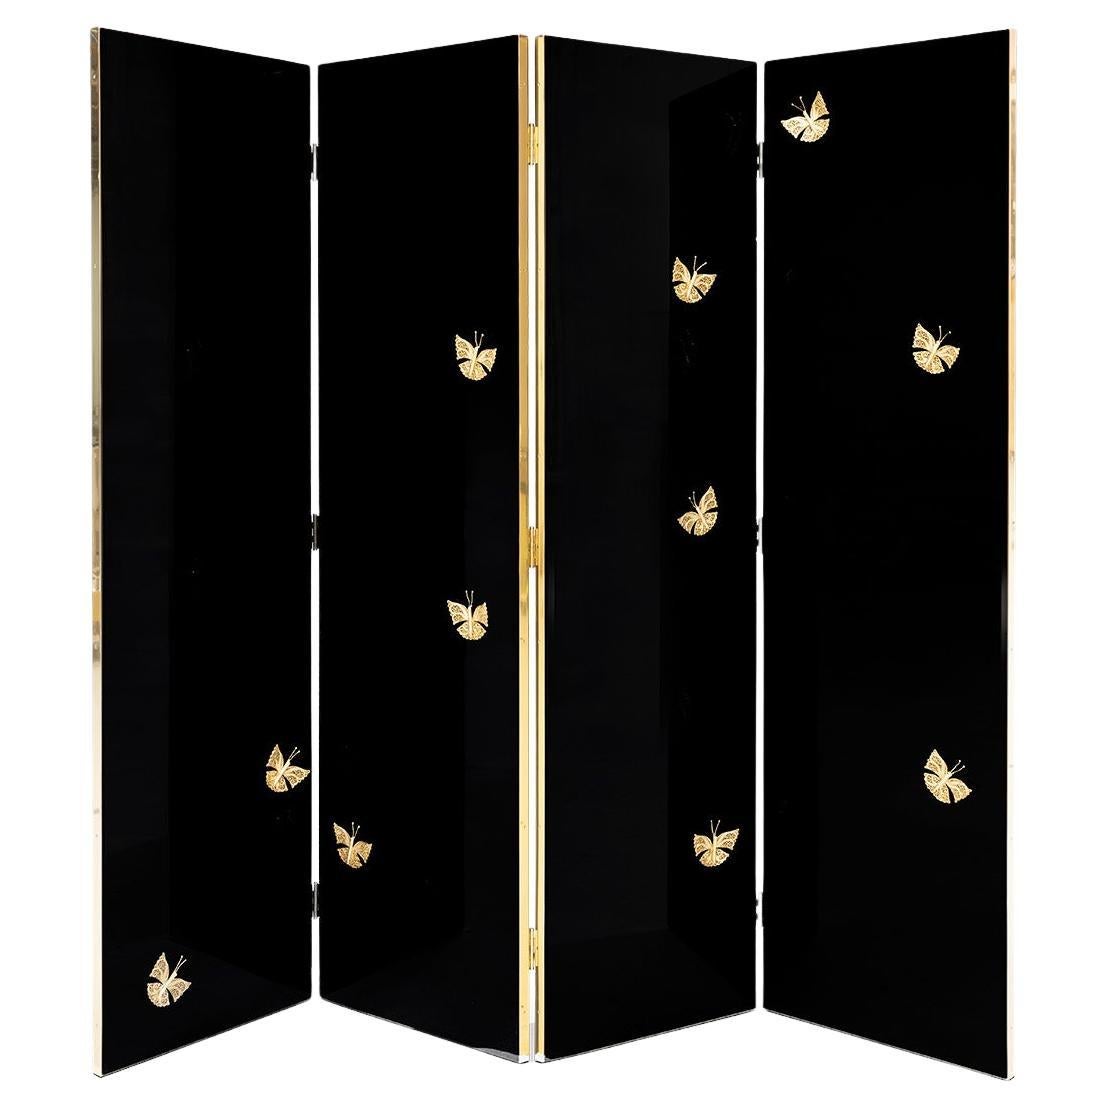 Euphoria Screen with Filifree Butterflies and Metal Frame